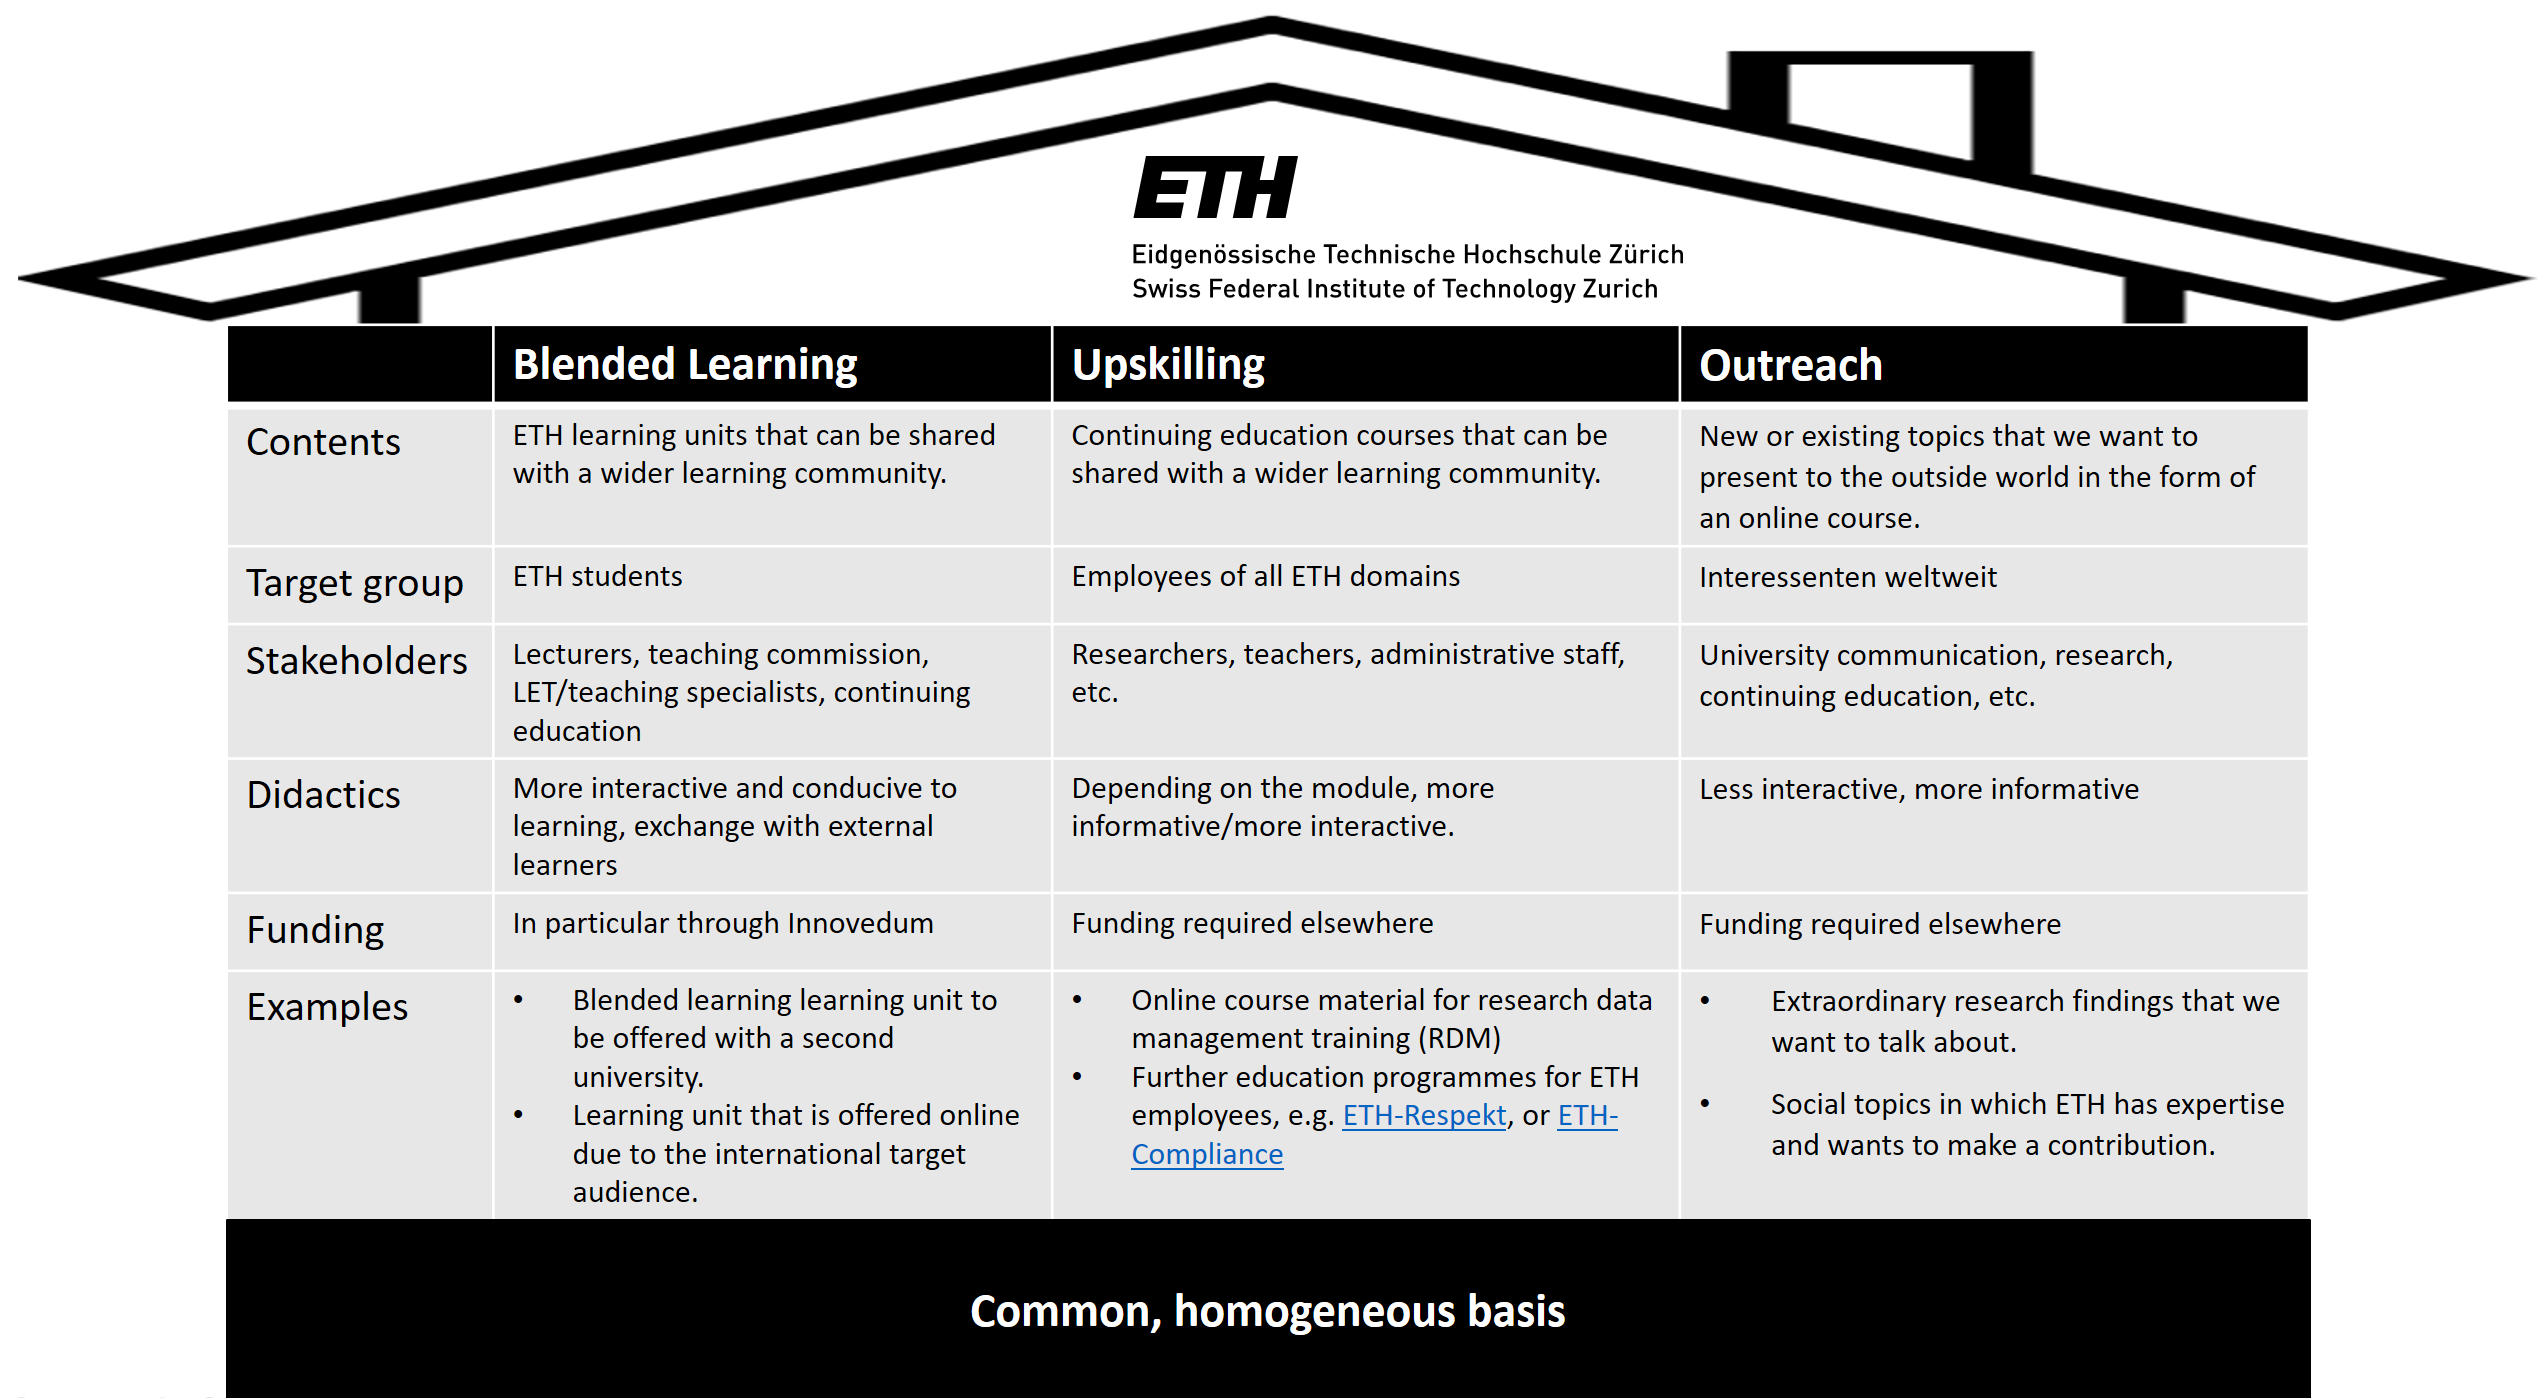 Open learning opportunities: a continuum between blended learning and outreach. Source: SCE, November 2022, amended.  